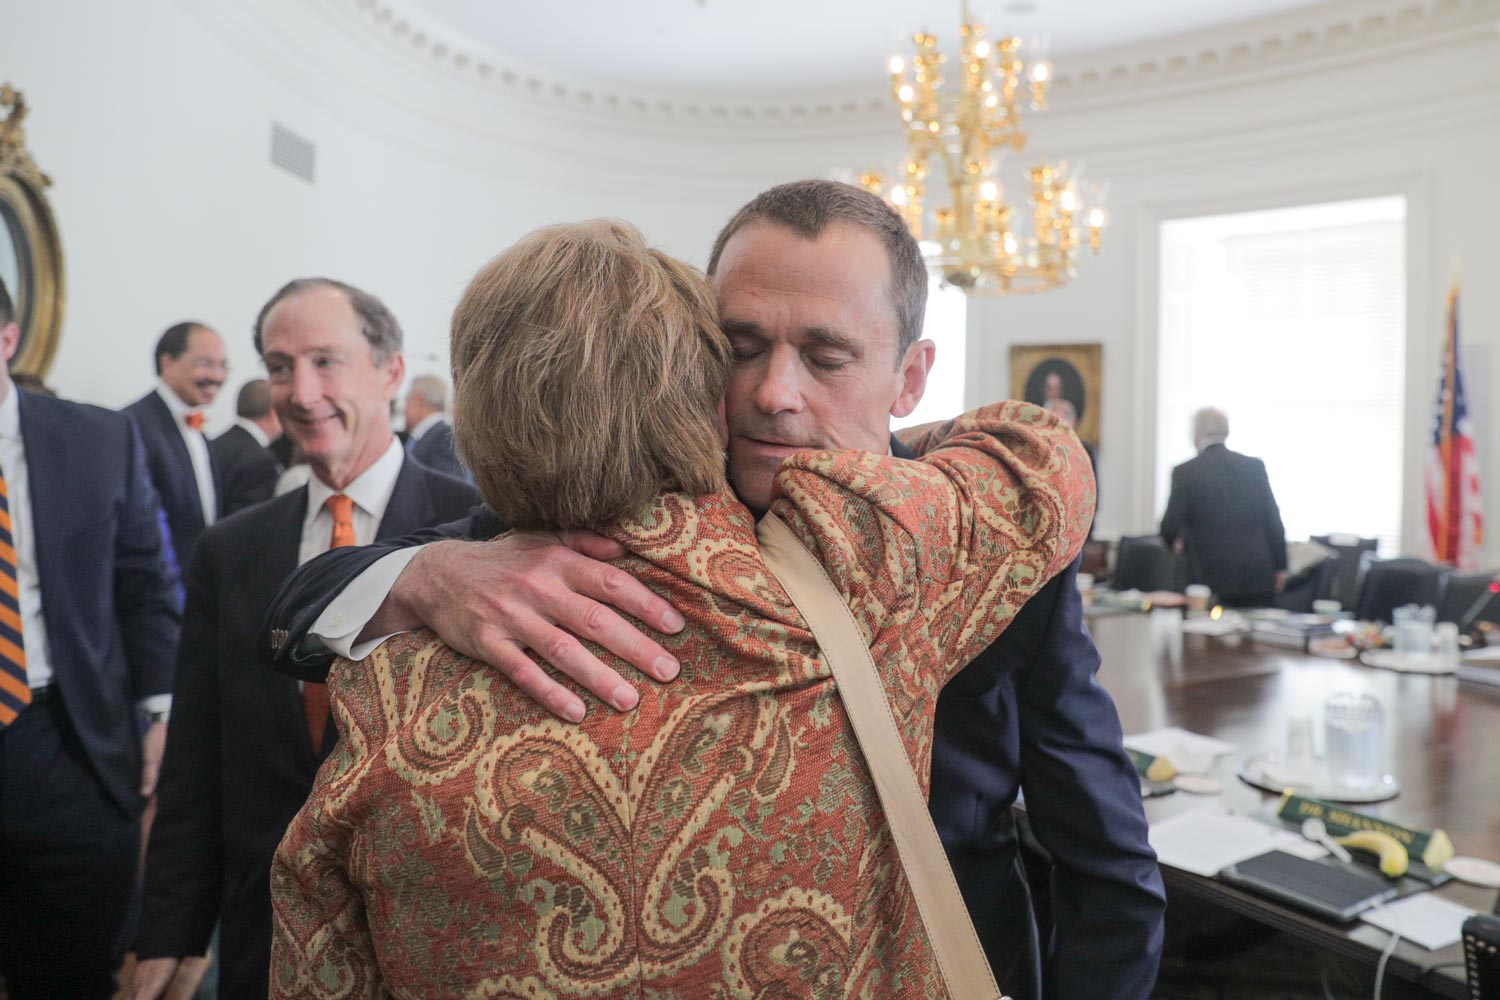 UVA President Teresa A. Sullivan embraced James Ryan shortly after he was named her successor on Friday. (Photo by Sanjay Suchak, University Communications)